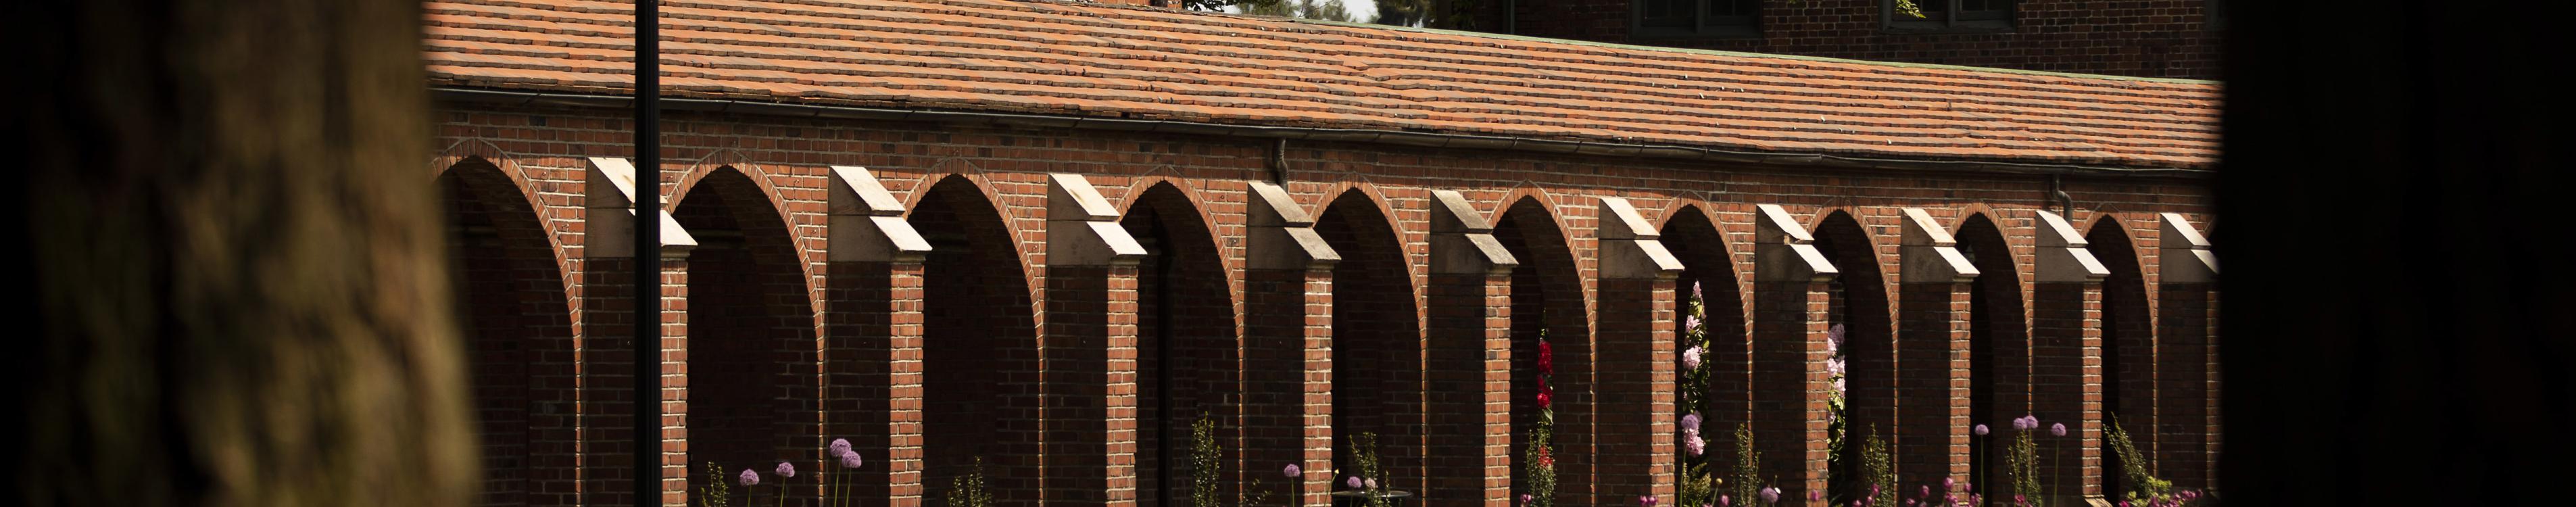 A row of red brick archways